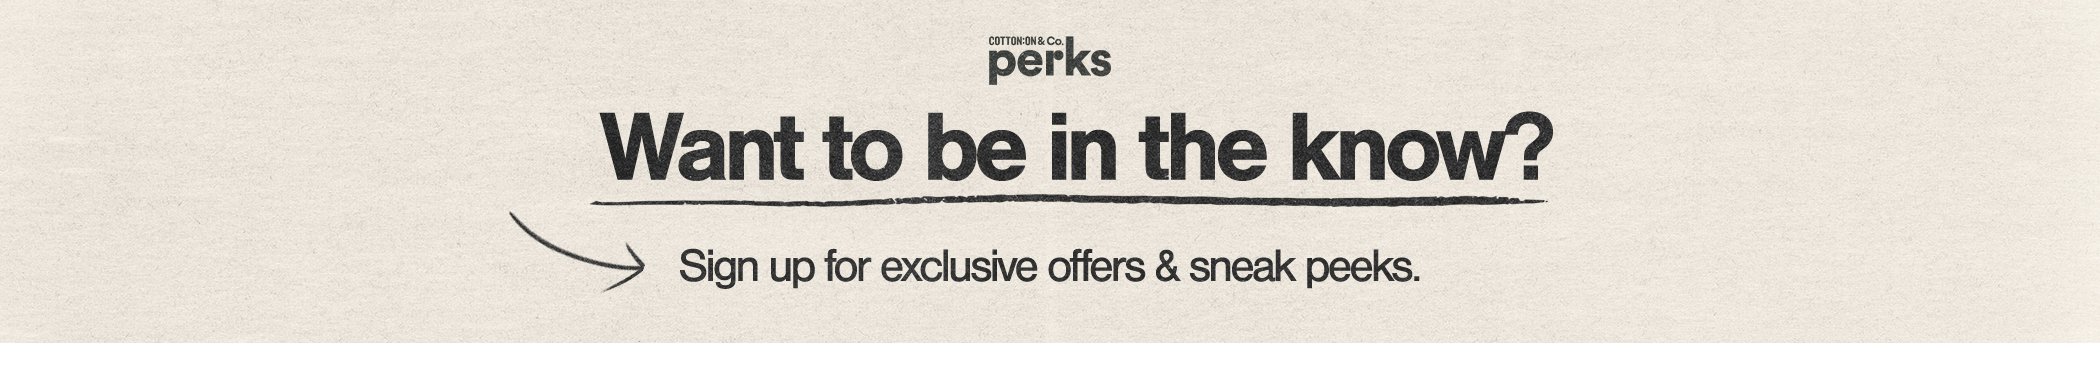 Sign up for exclusive offers and perks